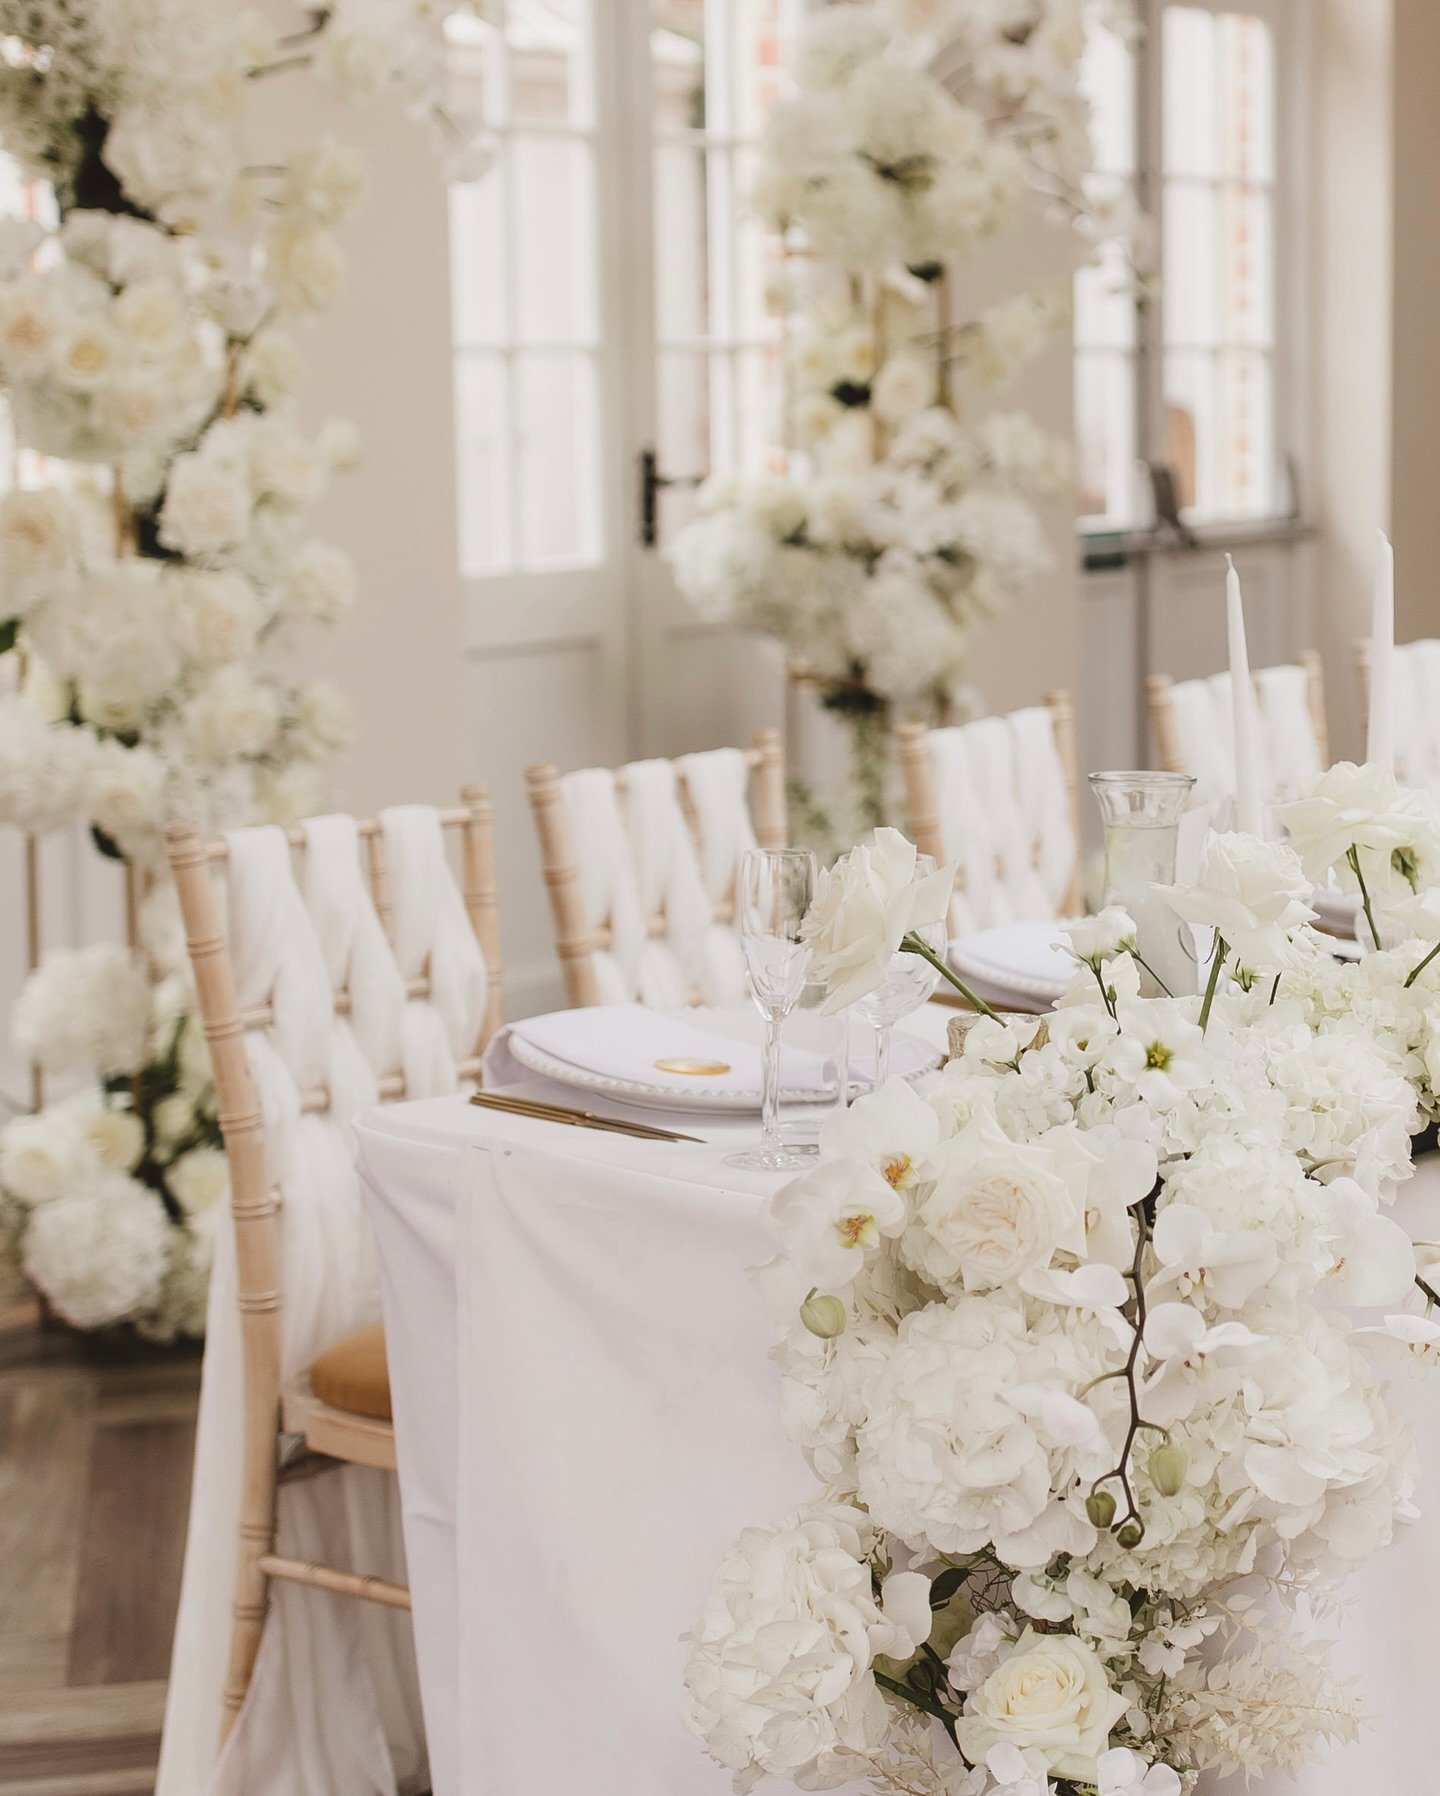 All white flowers - simple elegance and a dramatic statement all at once. Styling the flowers for this wedding was truly divine... 🤍 🤍 🤍
Photography and wedding planning by @alisaroberts_
Decor stylist @theluxecollectionuk
Venue @orchardleigh_esta